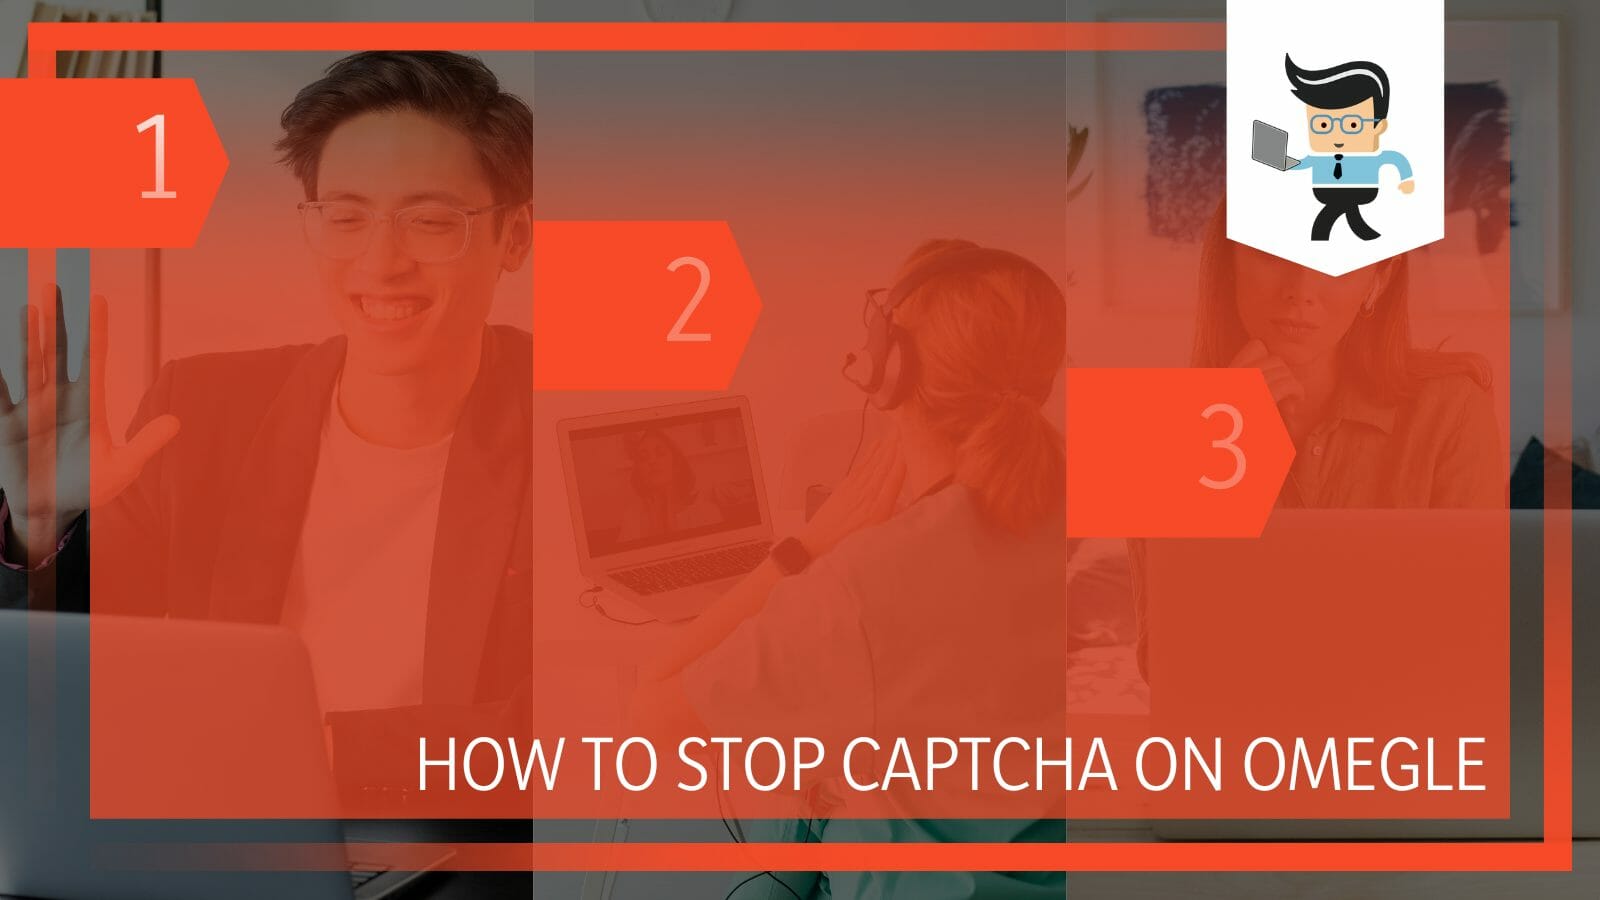 How To Stop CAPTCHA on Omegle